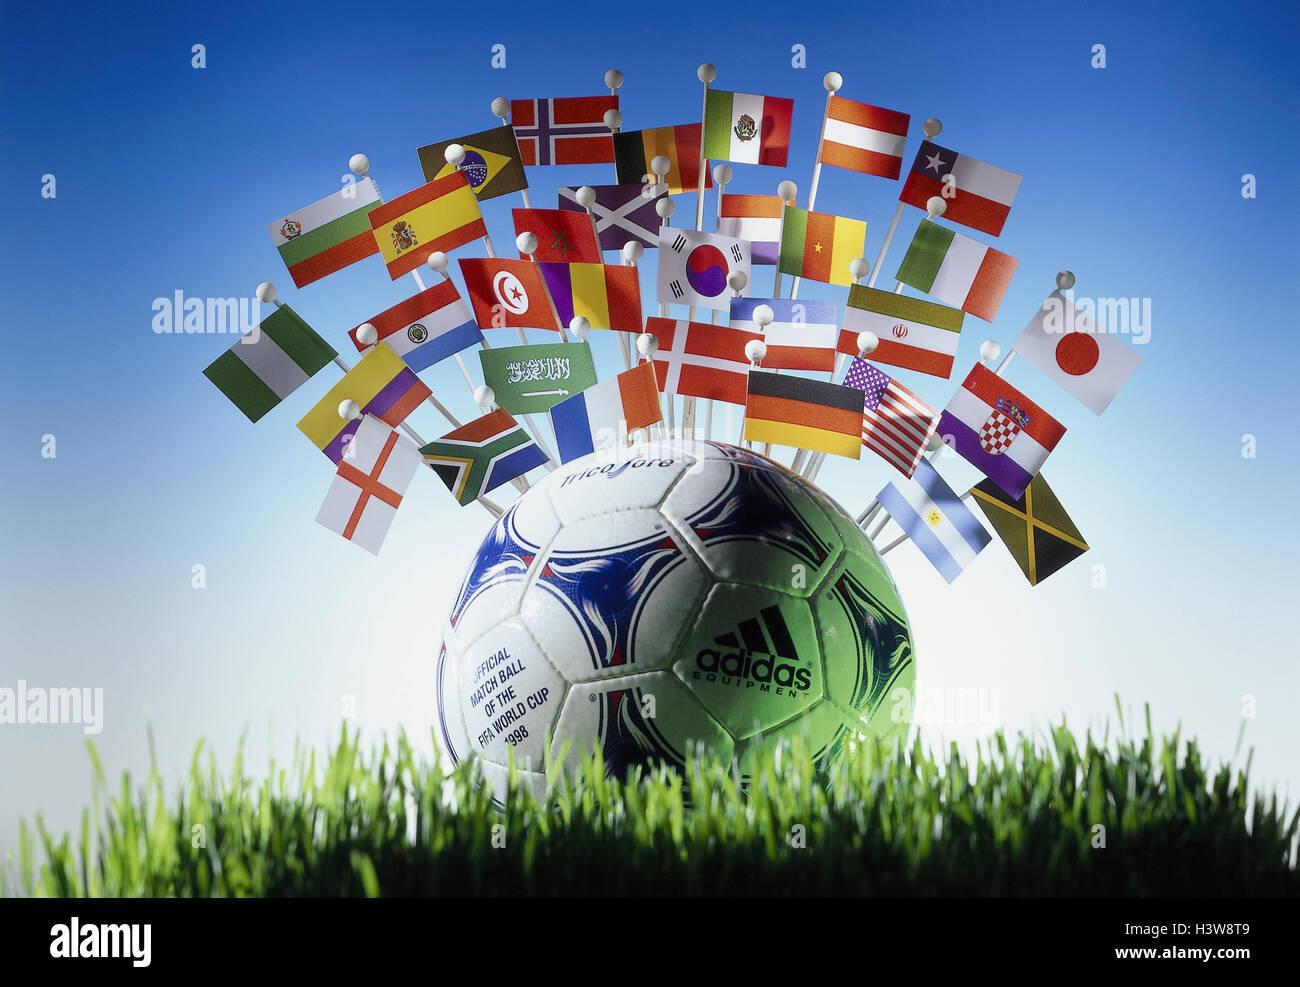 Football, flags, internationally, no property release, Still life, product photography, ball, icon, sport, sport, worldwide, world championship, world championship, Football World Cup, in 1998, flags, pendants, football nations, nations, countries, partic Stock Photo